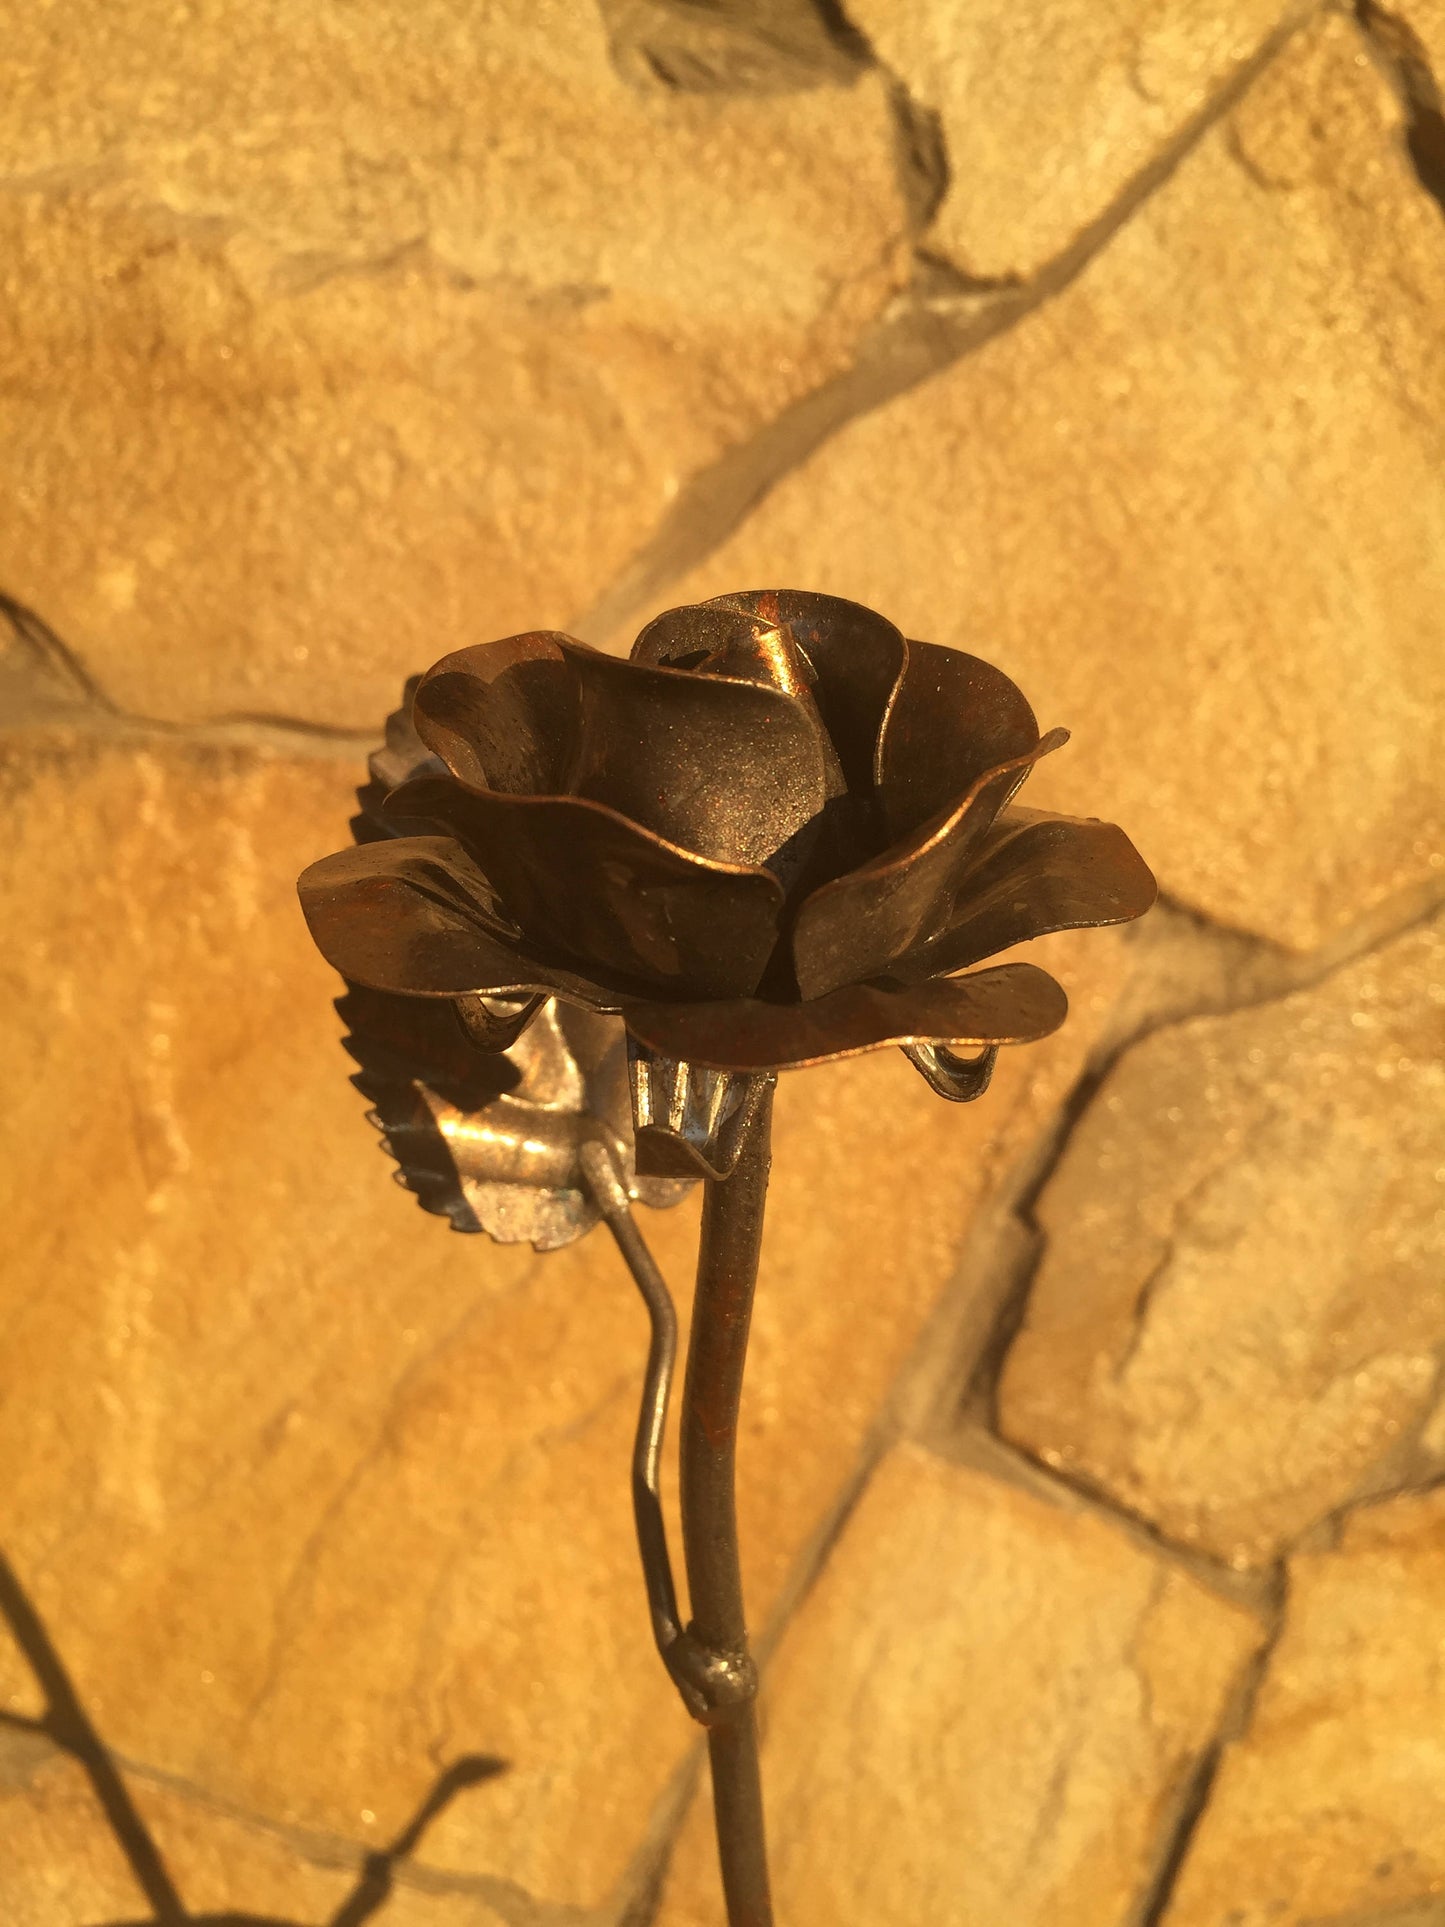 Iron rose, steel rose, metal rose, hand forged rose, wrought iron rose,hand made rose,metal sculpture,wedding anniversary,metal gift for her